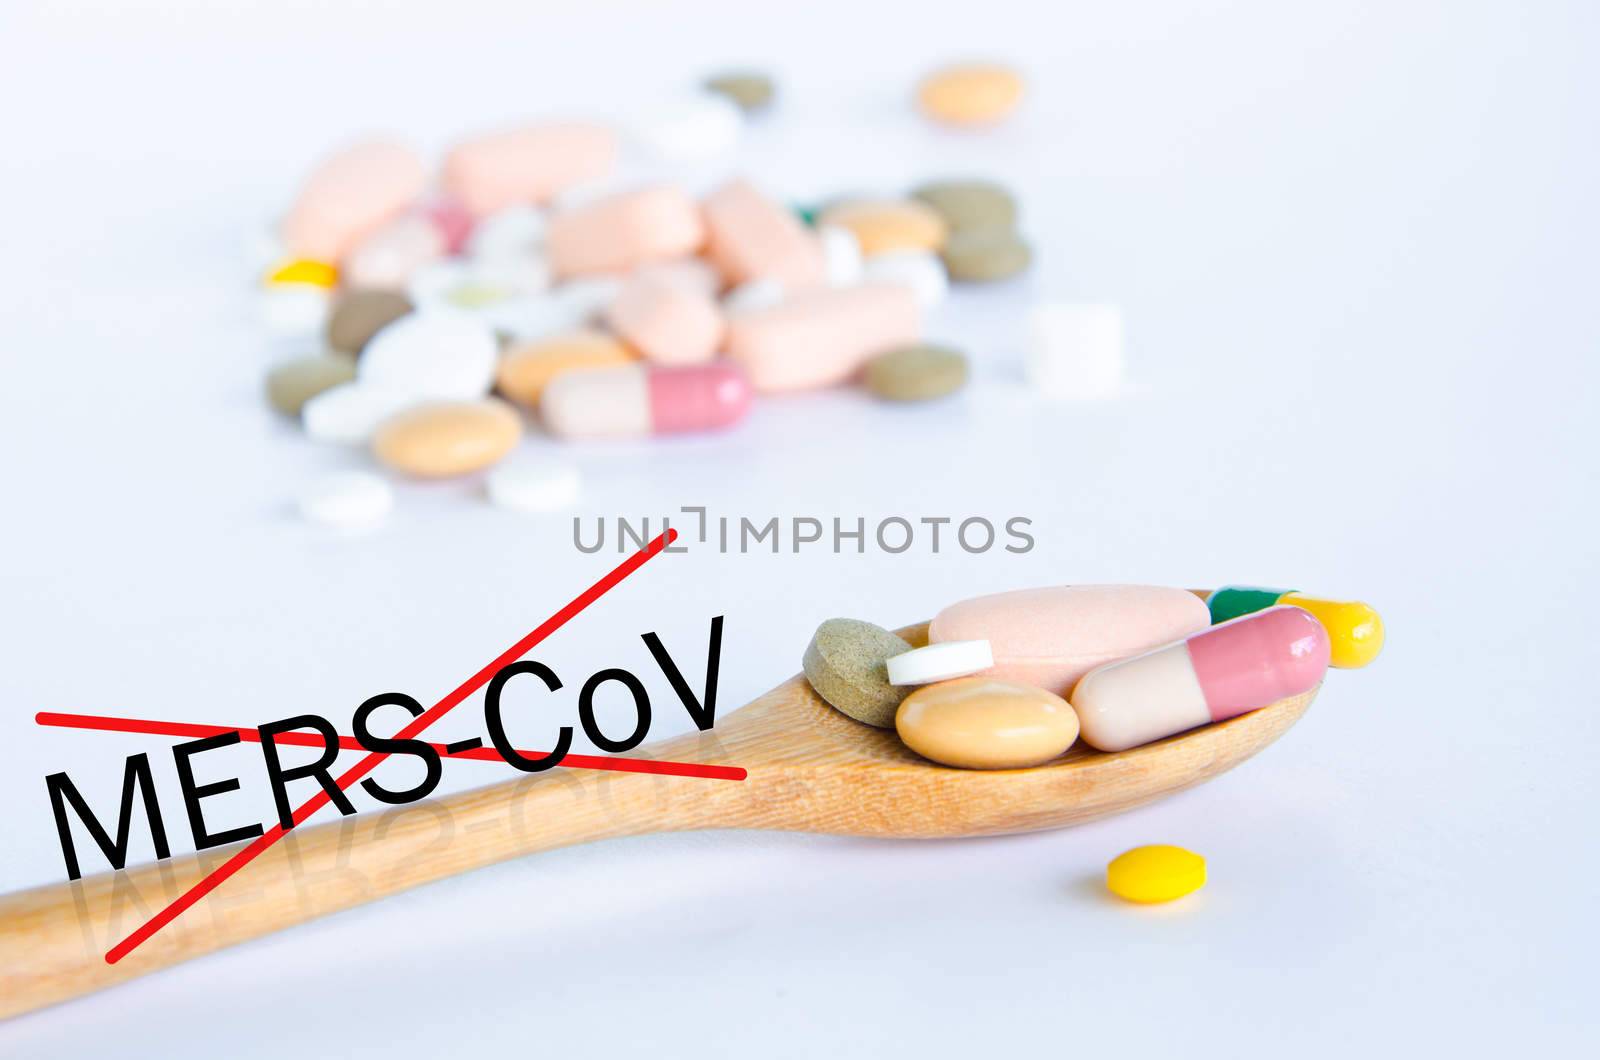 Mers-Cov ,Concept drugs for Stop MERS-CoV. by Gamjai